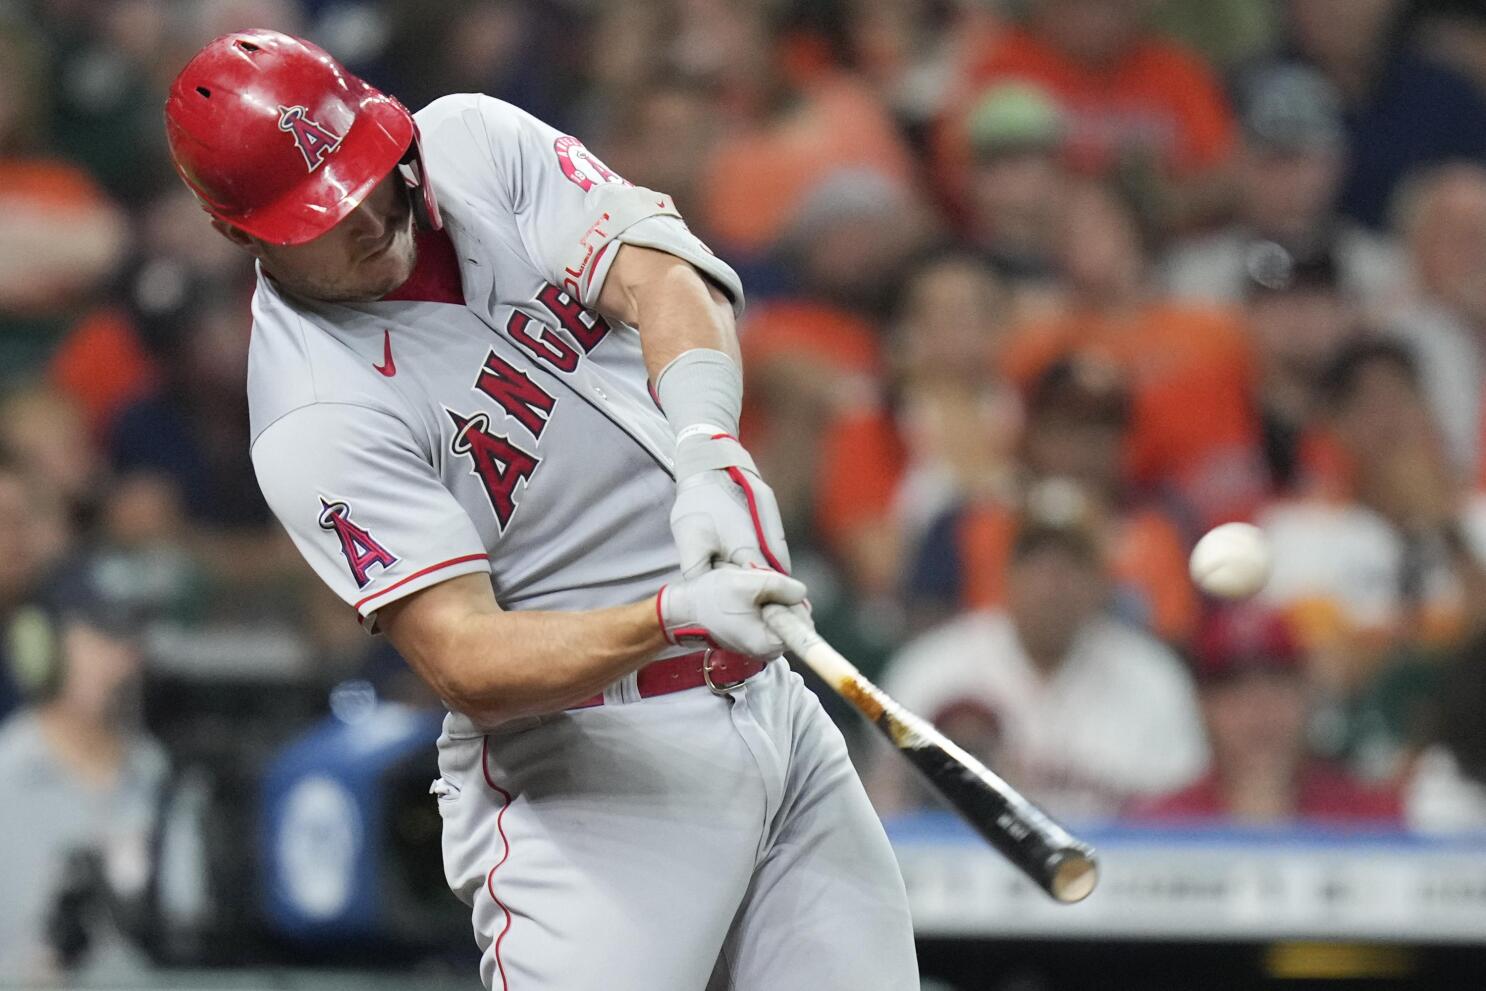 Mike Trout considered day to day, out of starting lineup for Angels vs.  Astros